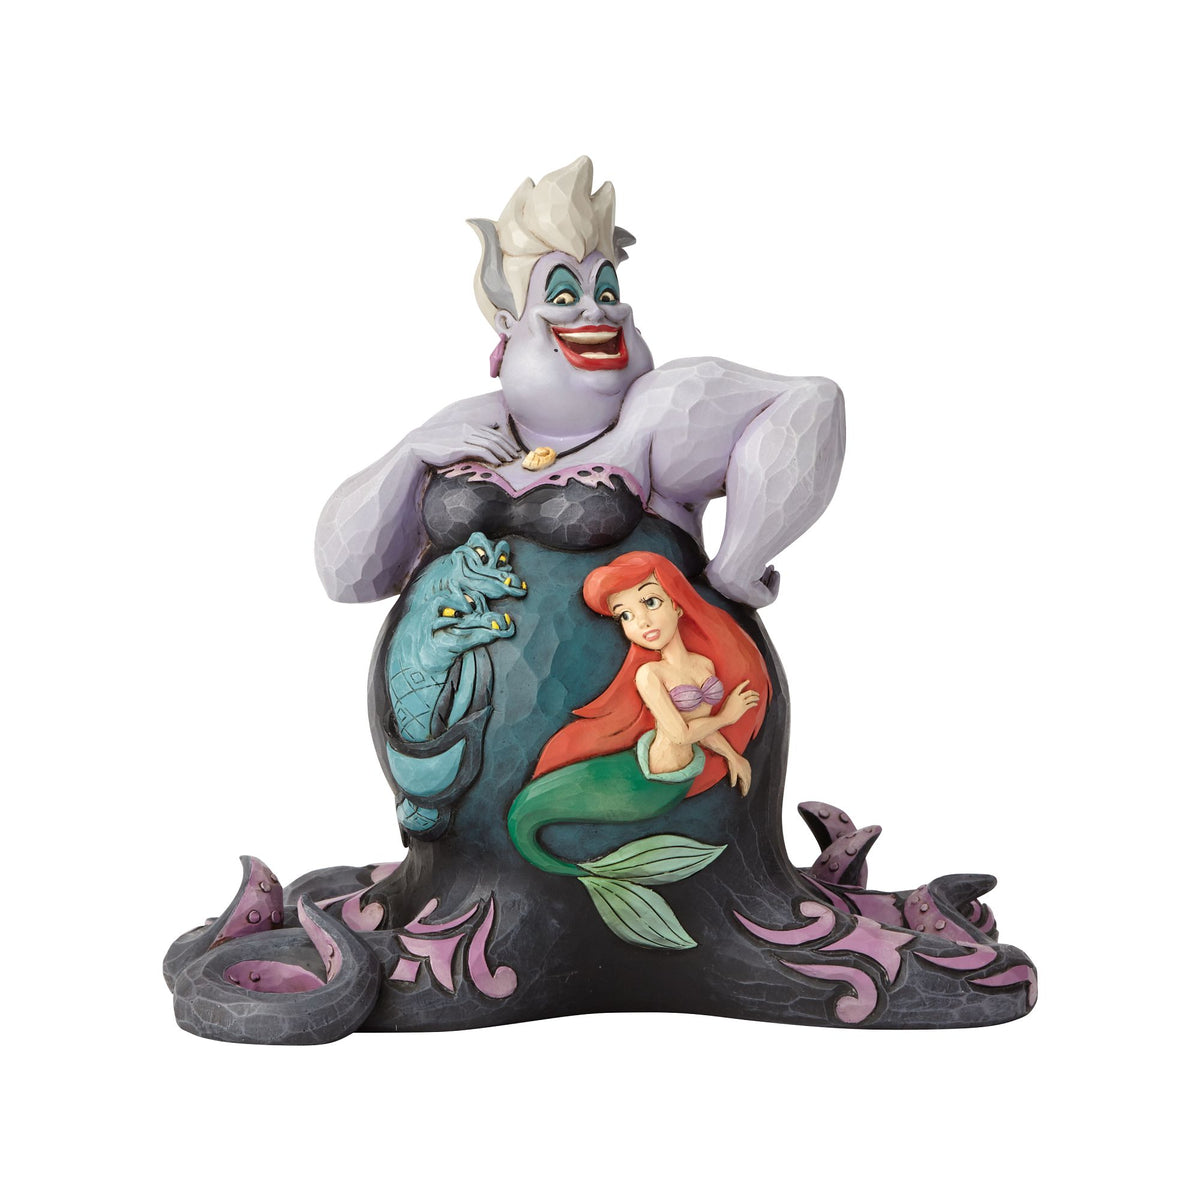 Disney Traditions by Jim Shore “The Little Mermaid” 25th Anniversary Stone  Resin Figurine, 6.25”